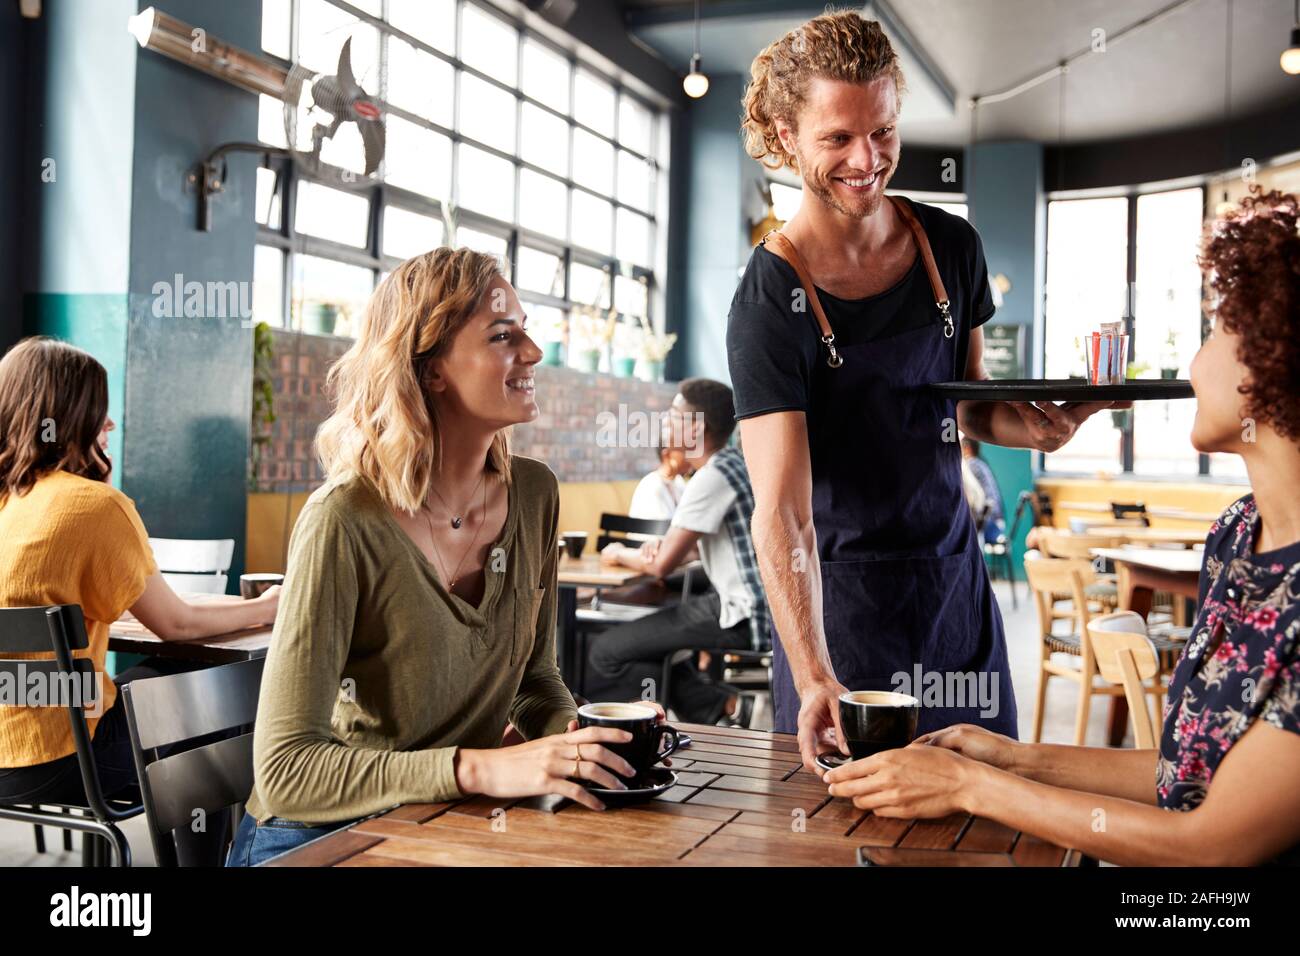 Two Female Friends Sitting At Table In Coffee Shop Being Served By Waiter Stock Photo